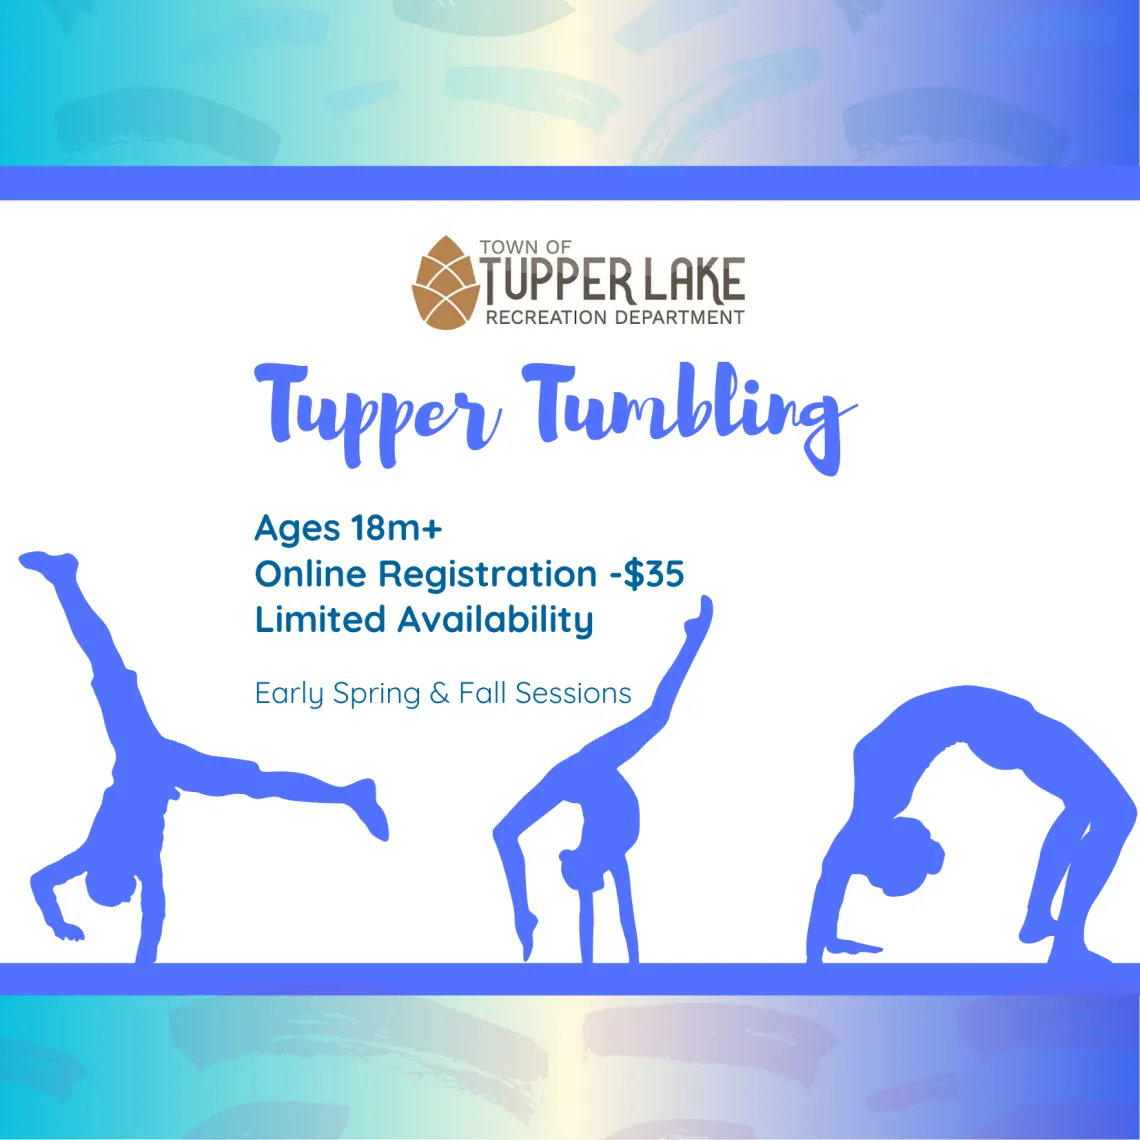 An illustrated flyer promoting a children's gymnastics class called "Tupper Tumbling."